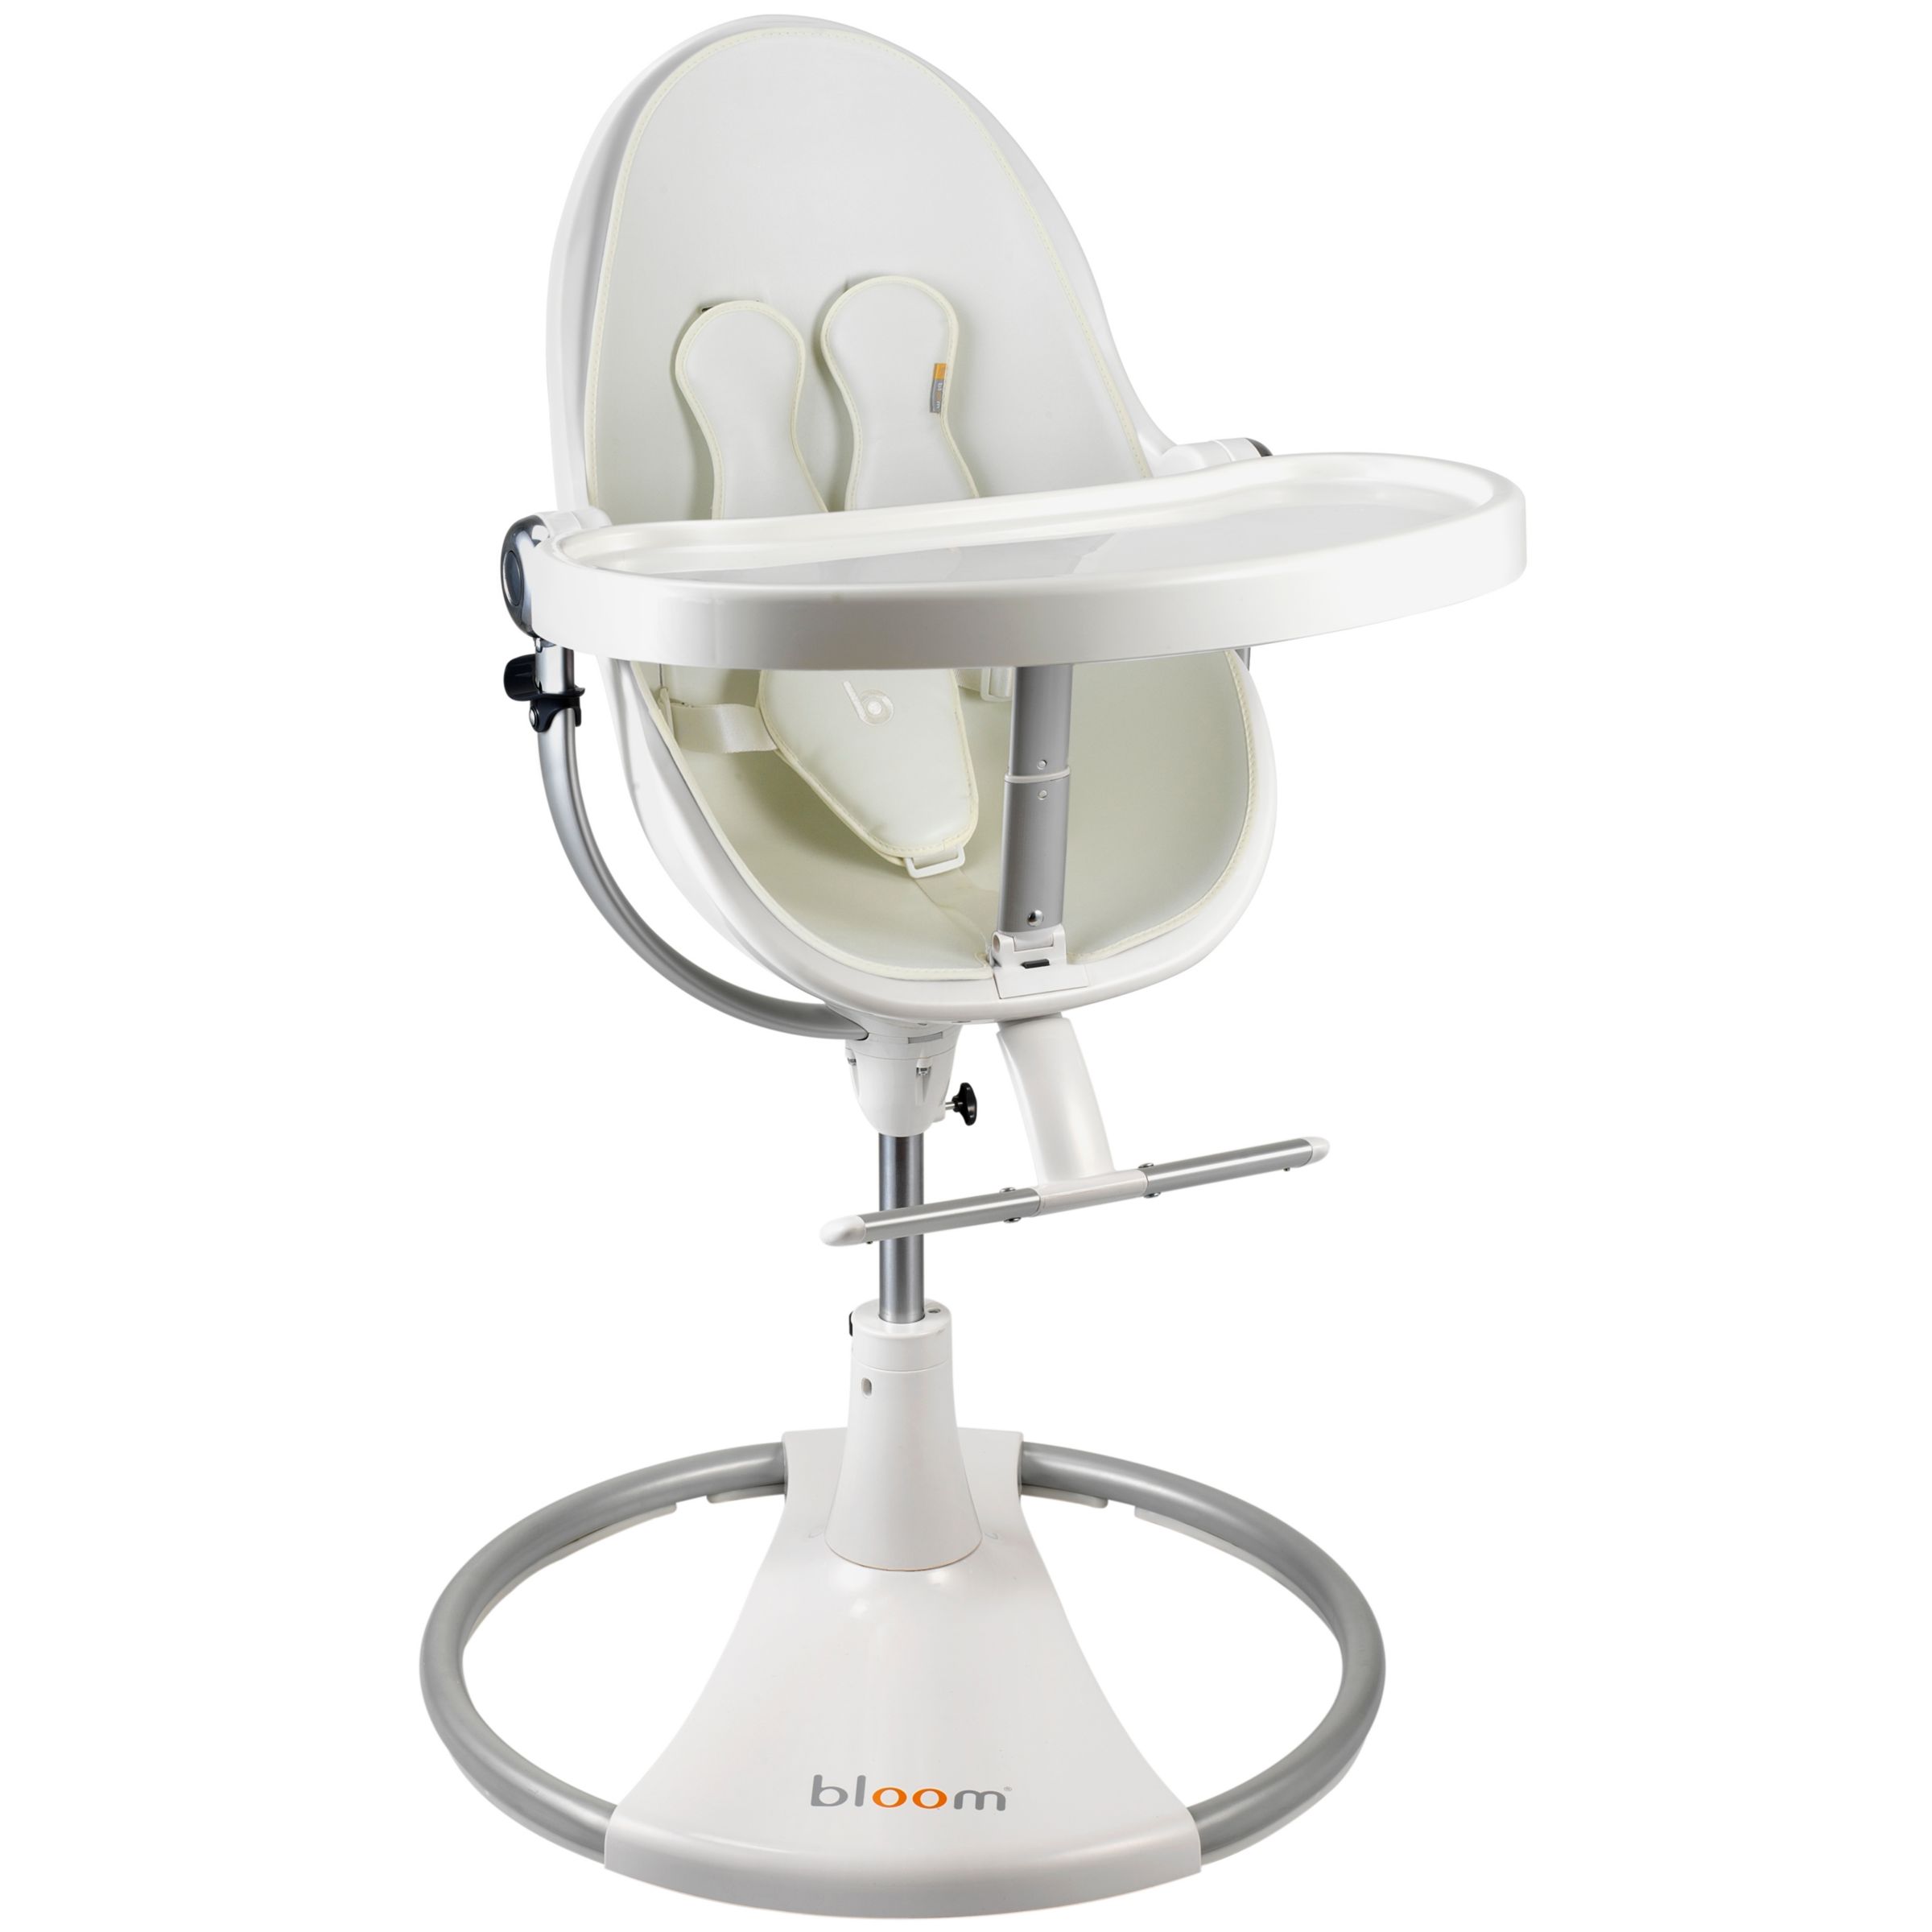 bloom Fresco Classic Contemporary Leatherette Baby Chair, Coconut white at JohnLewis